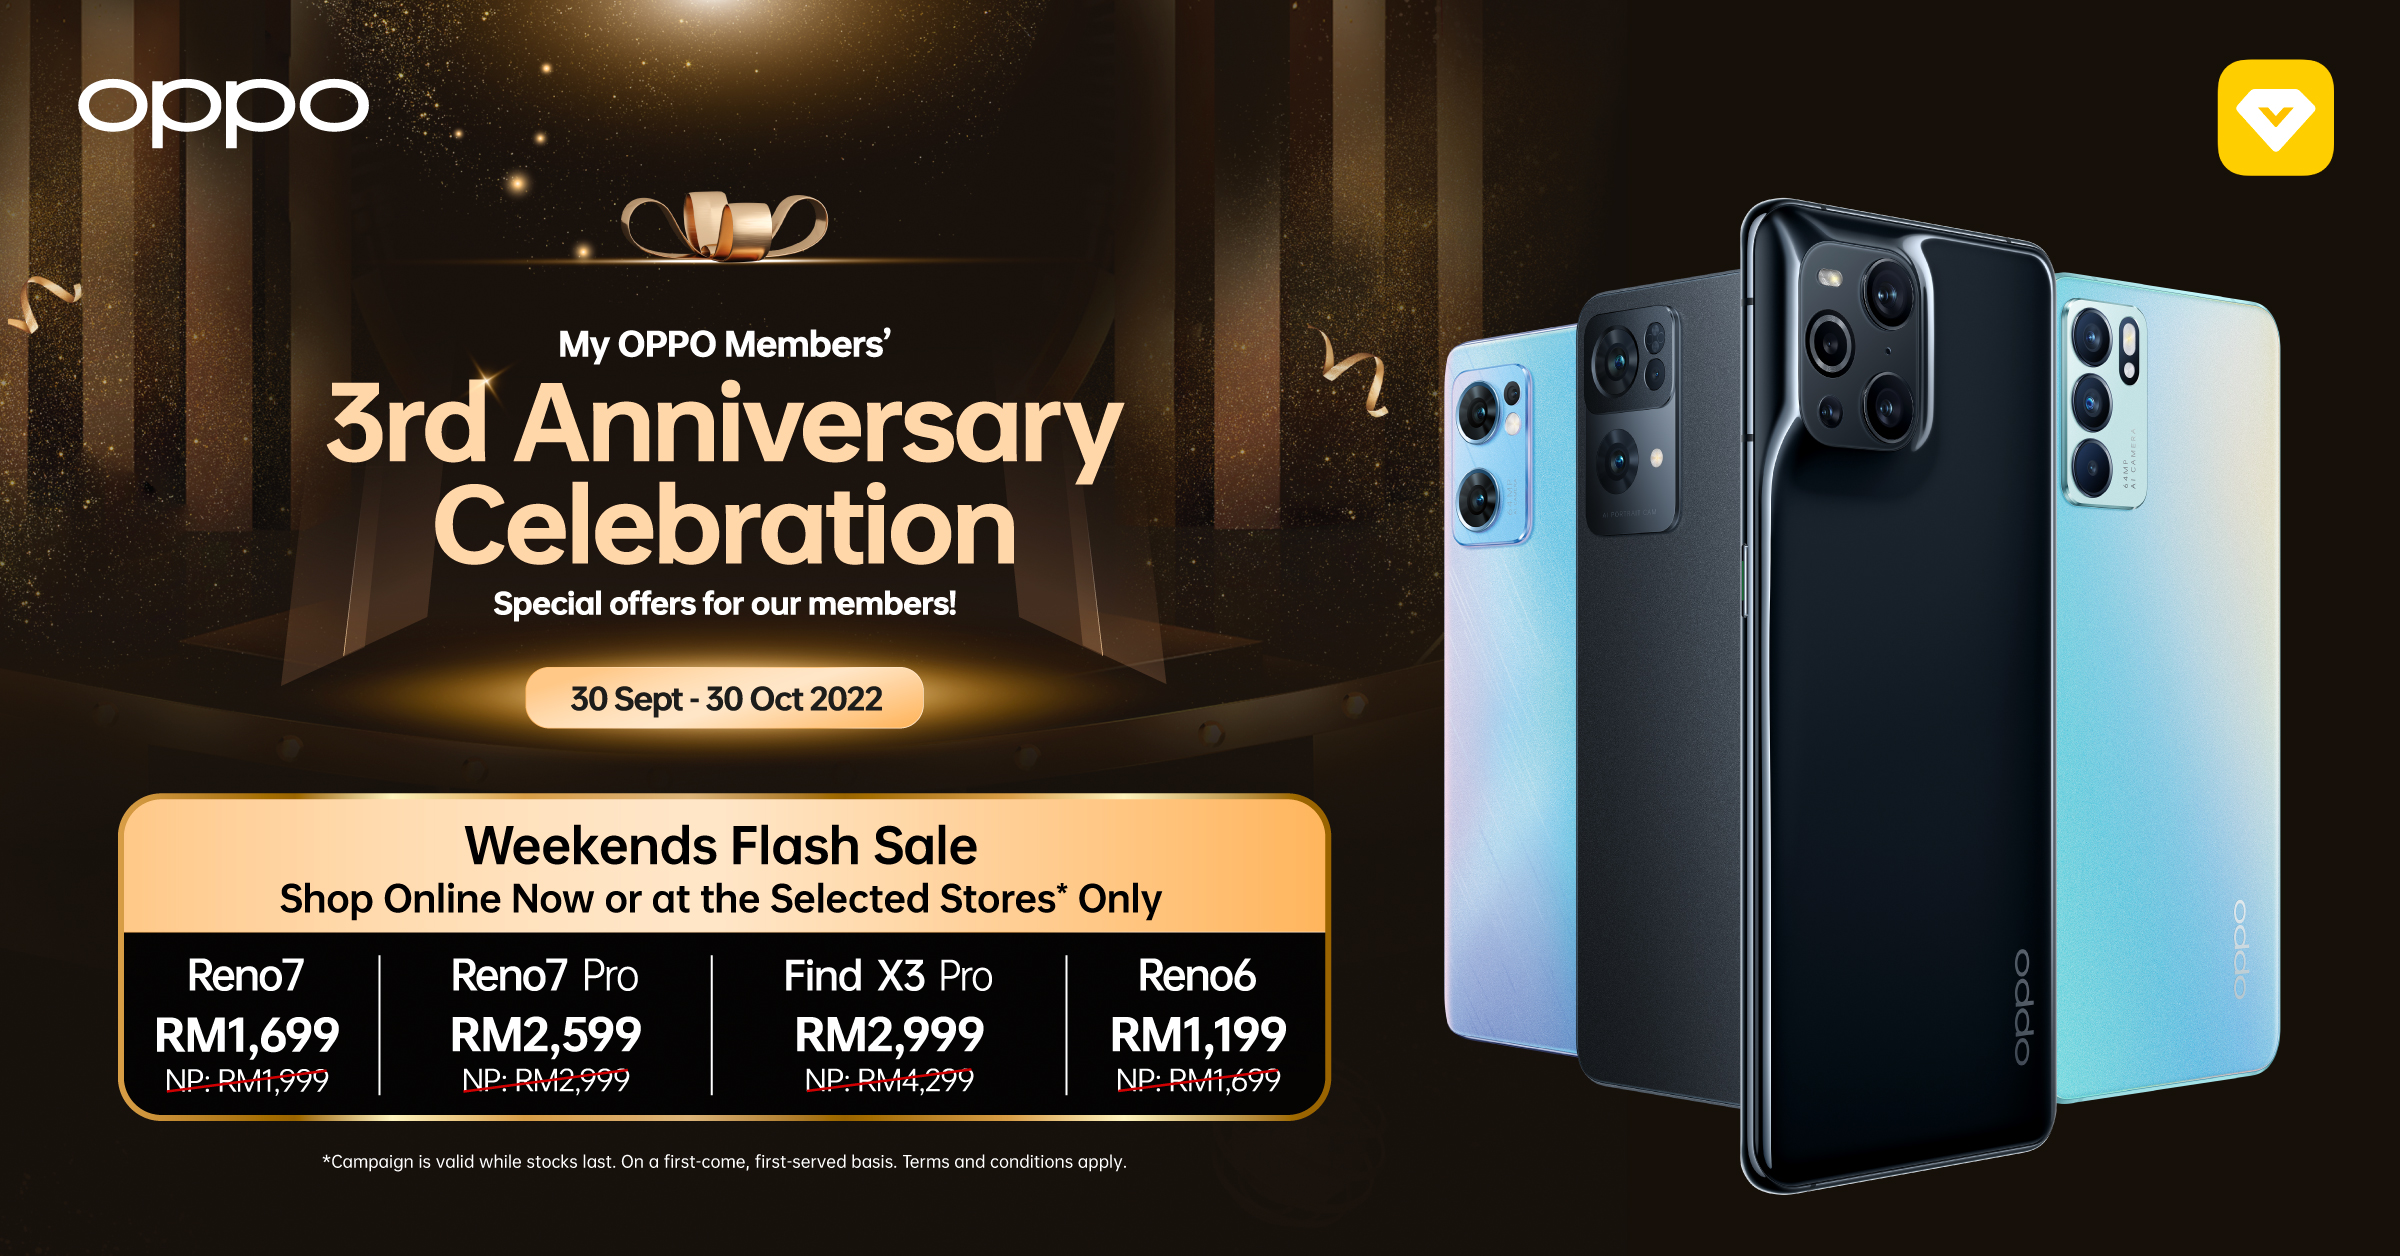 last-call-to-secure-your-rm1-300-rebates-before-the-my-oppo-members